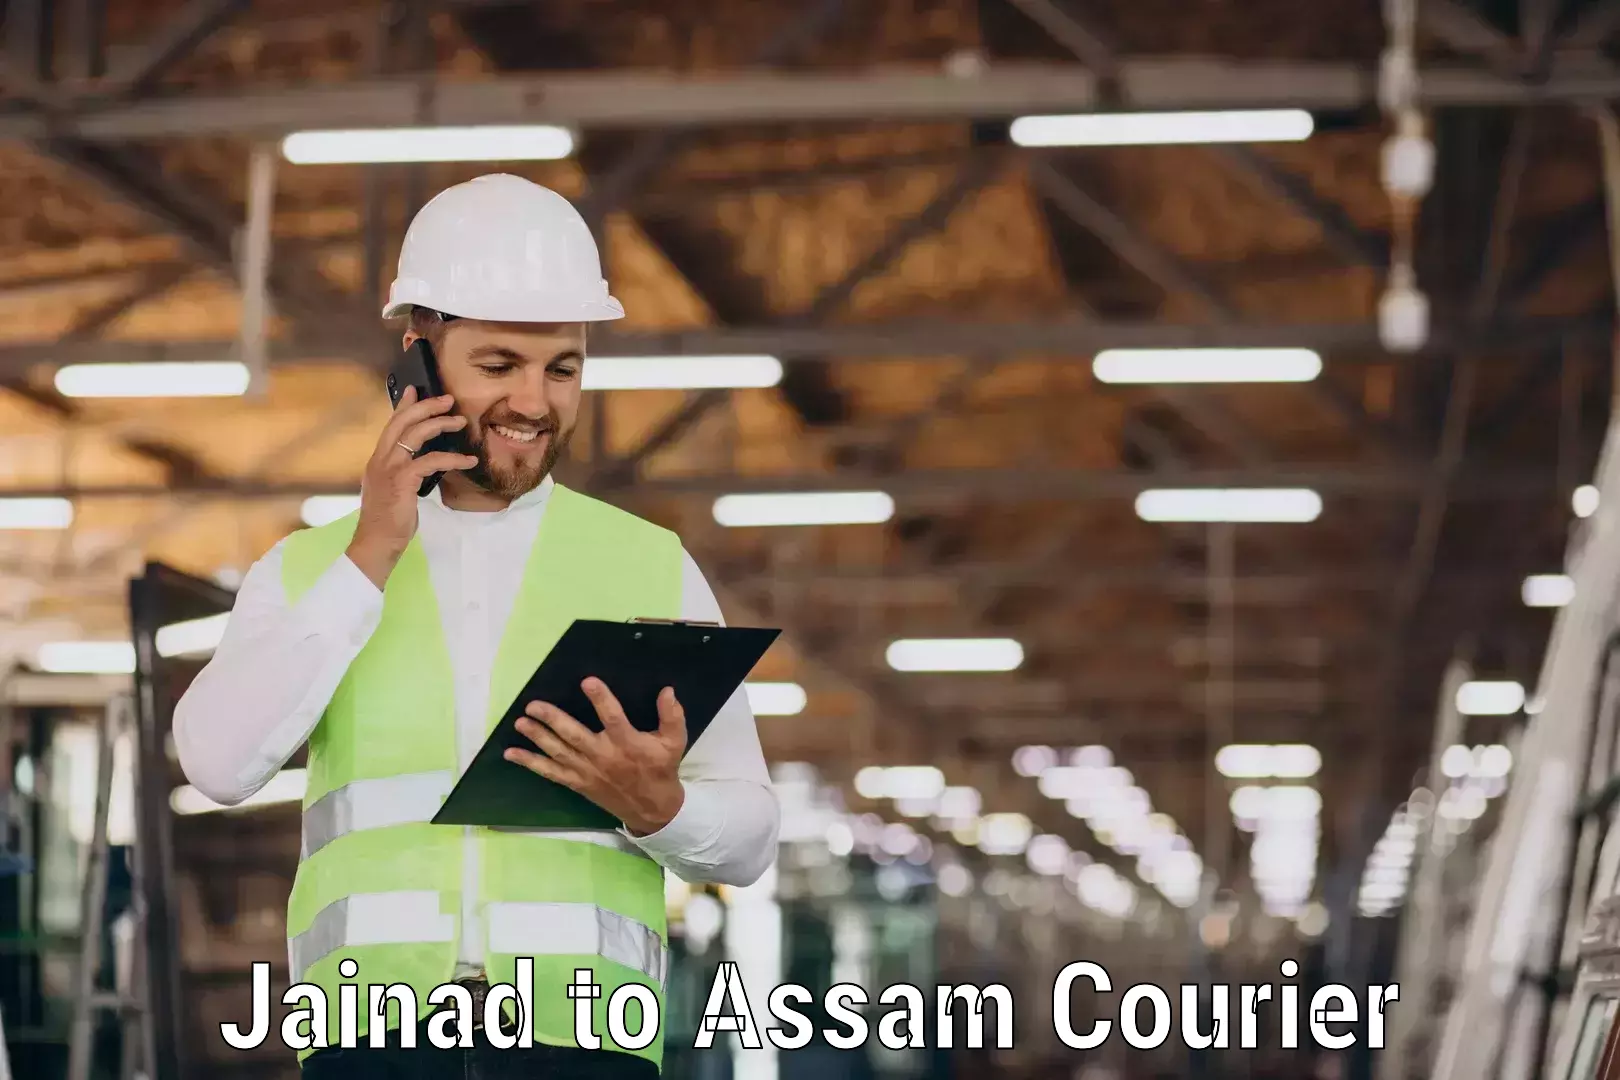 Advanced delivery network Jainad to Lala Assam